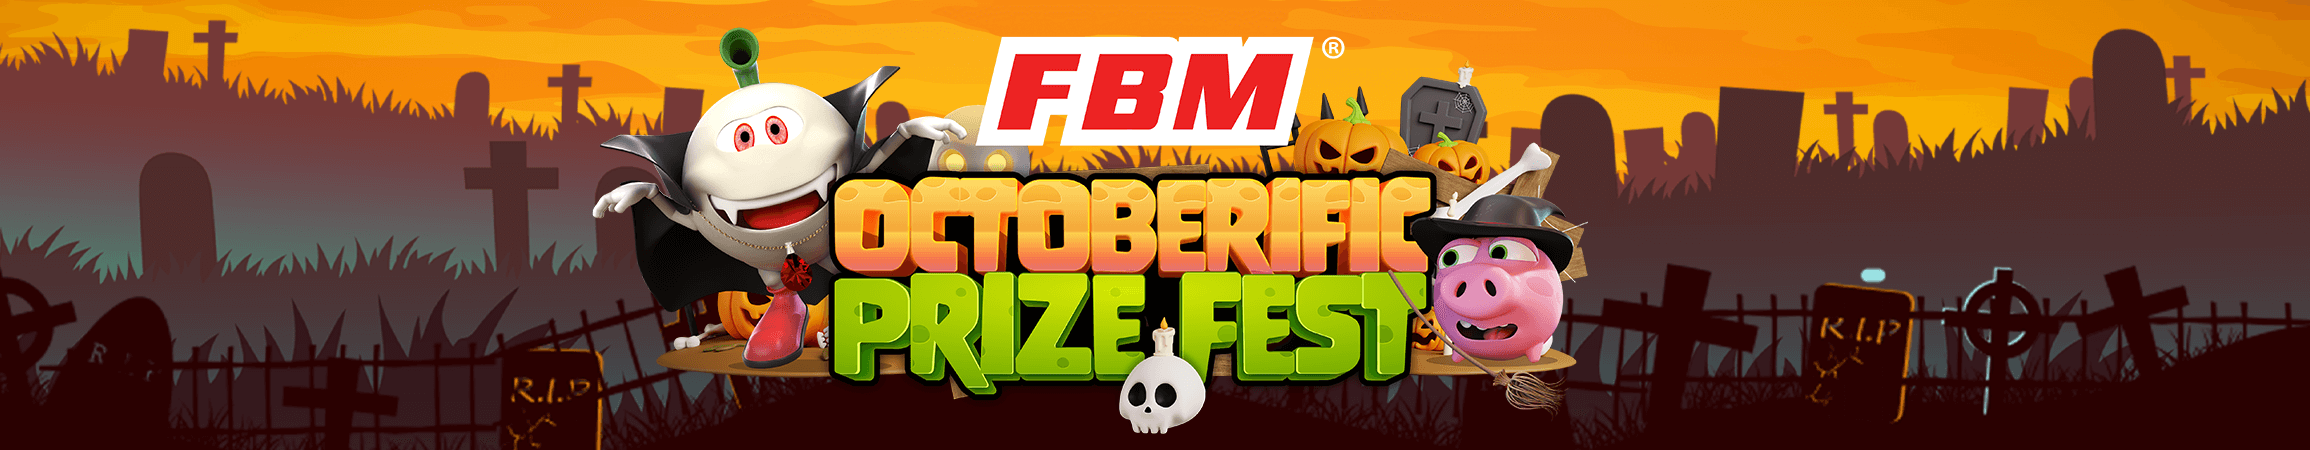 FBM® surprises Champions with its spooktacular promo this October!